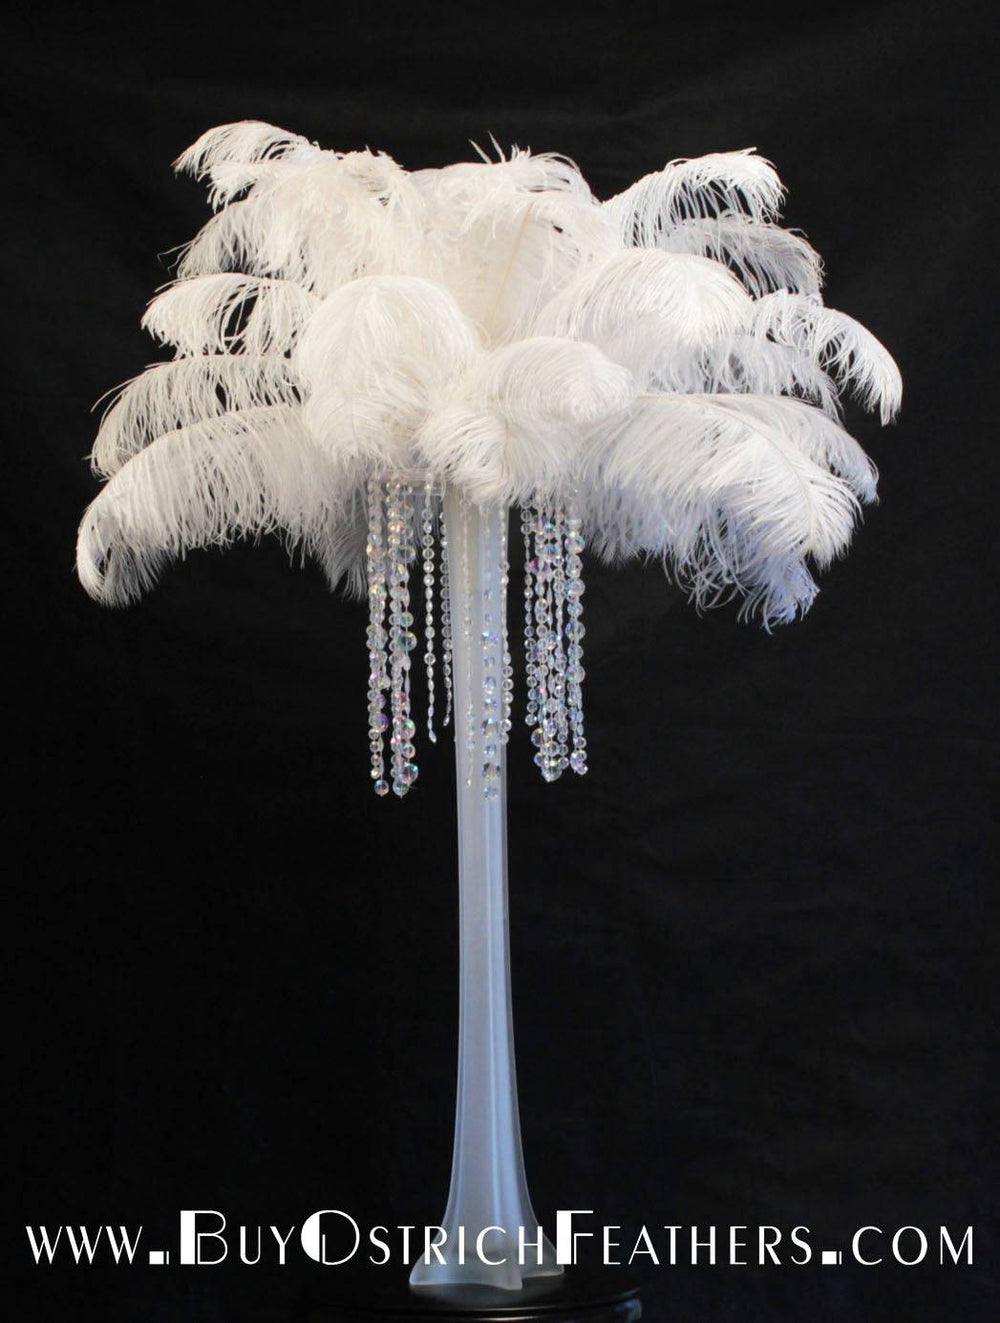 White Ostrich Feathers for Centerpieces: 120 PCS Ostrich Feathers